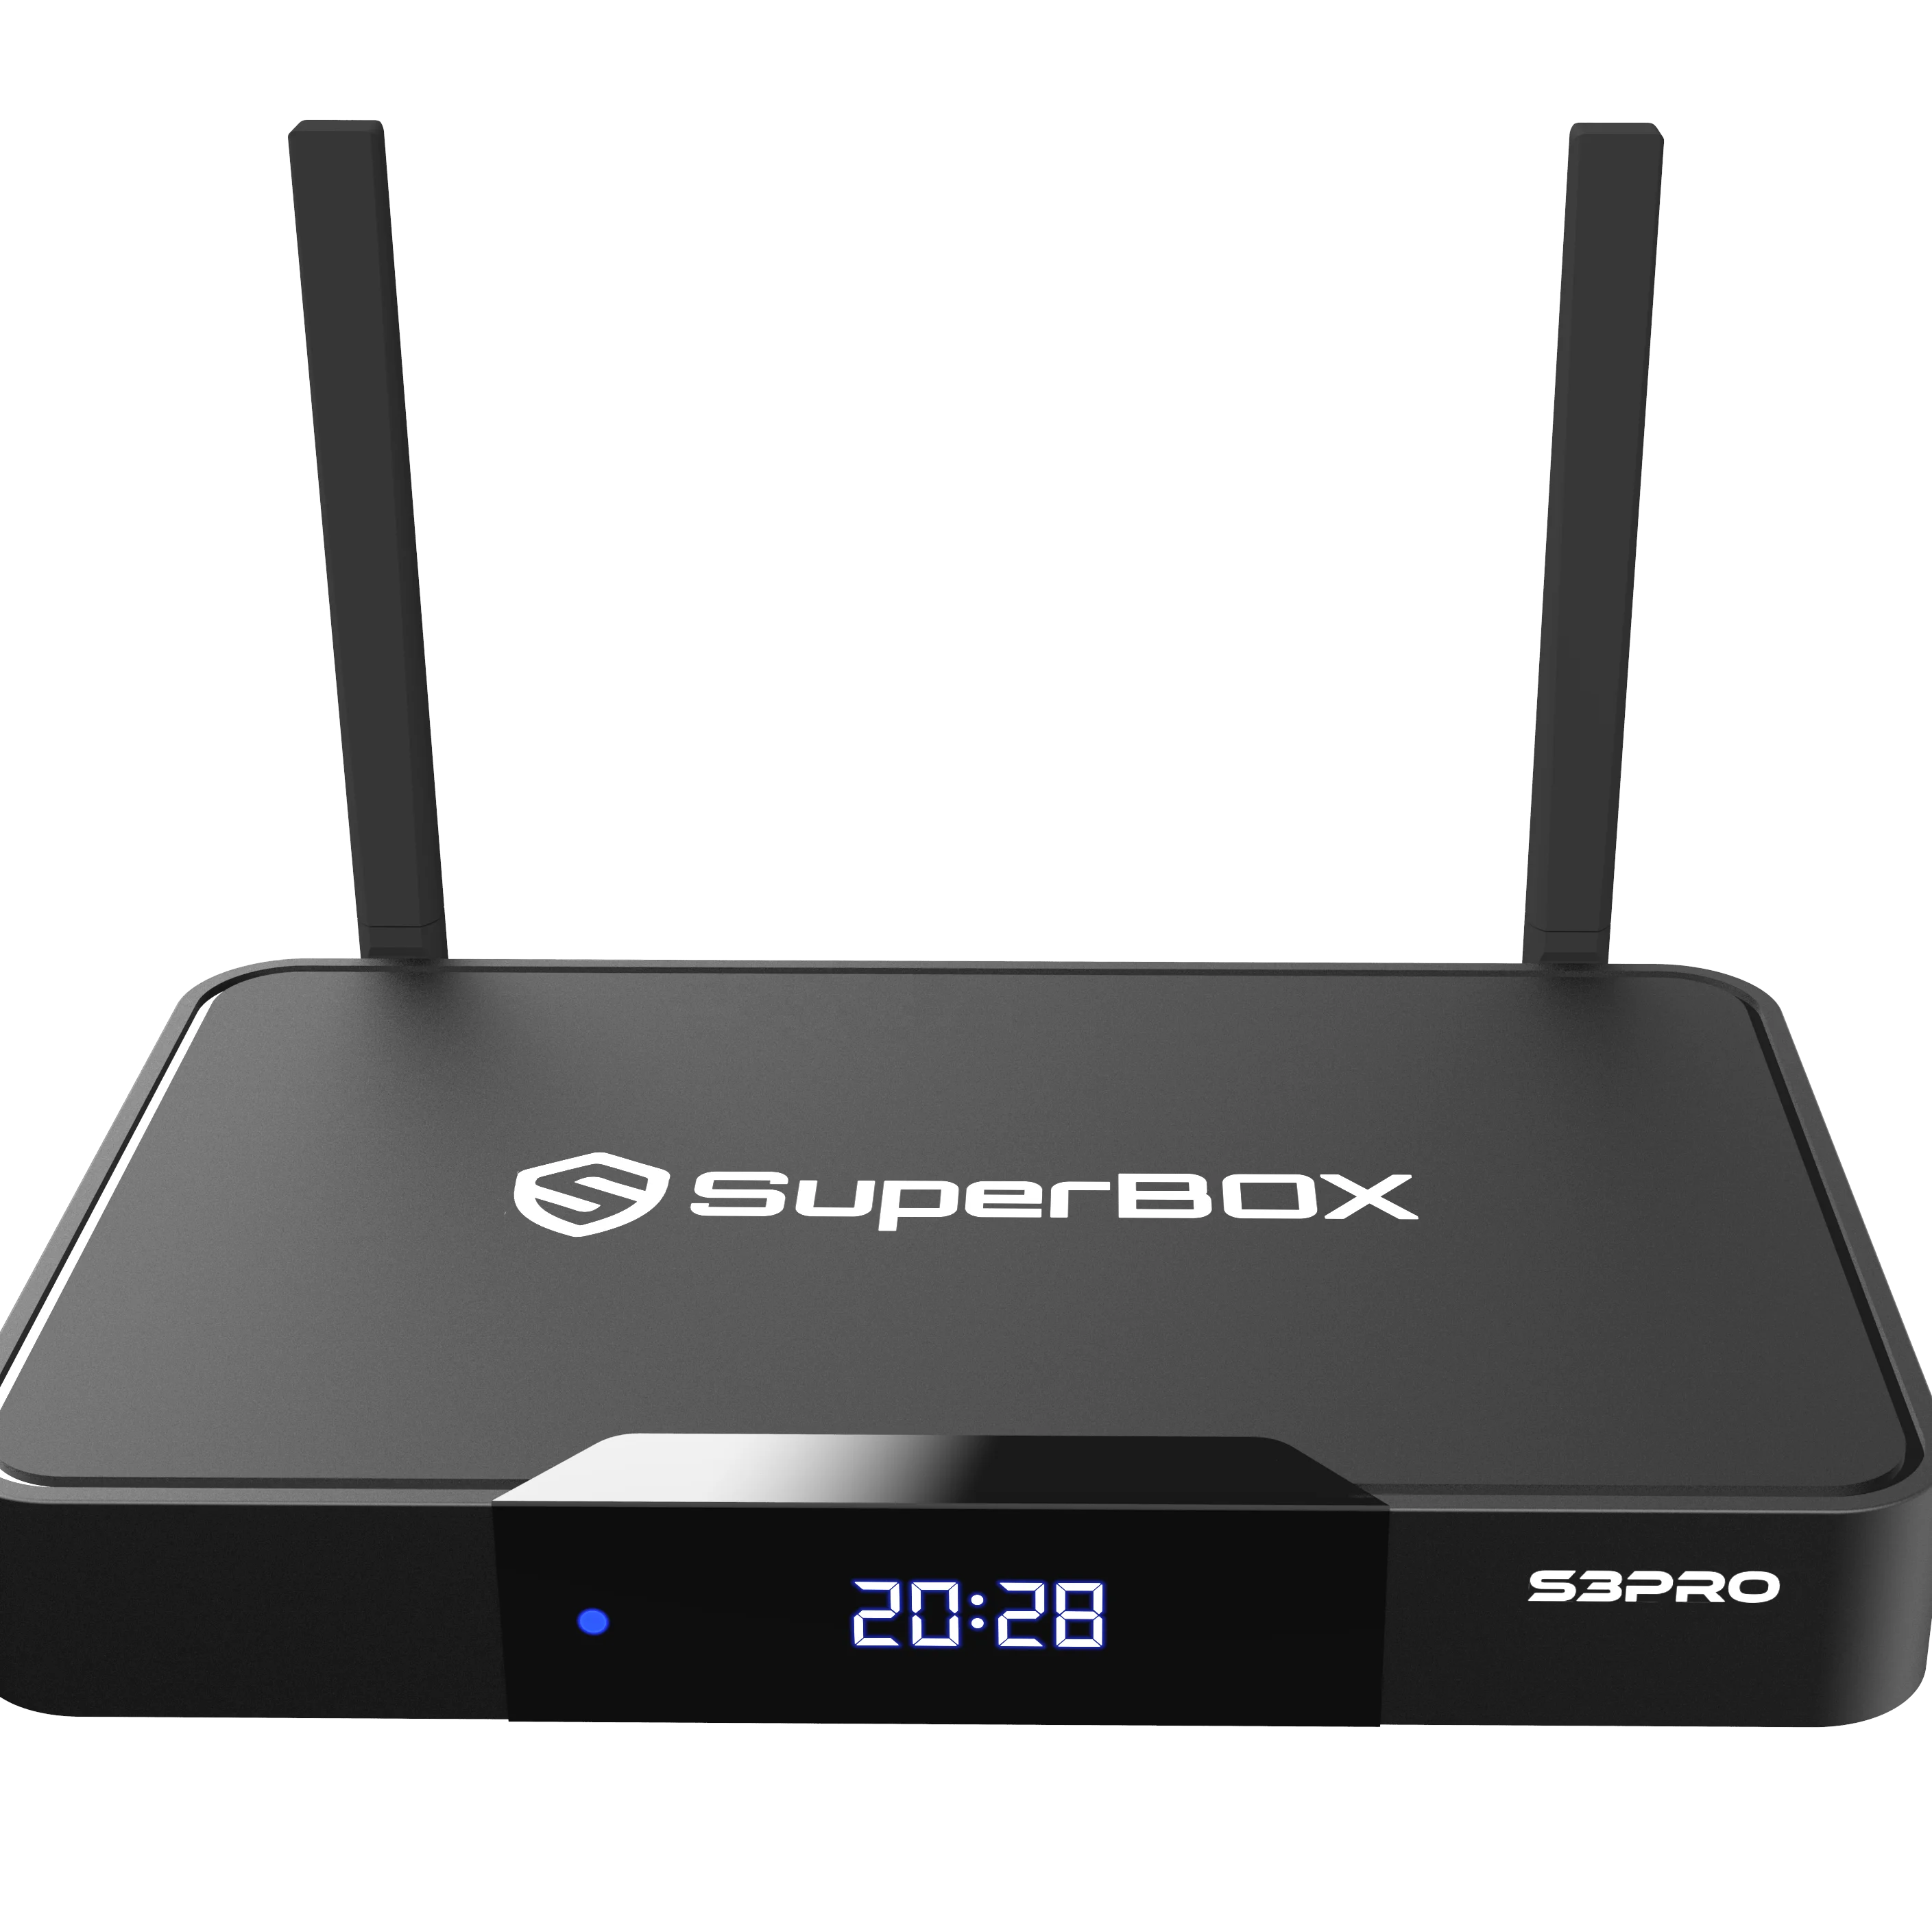 

2022 The newest set-top box Superbox S3 Pro Android 9.0 set top box with voice control hotkeys functions and 7days playback